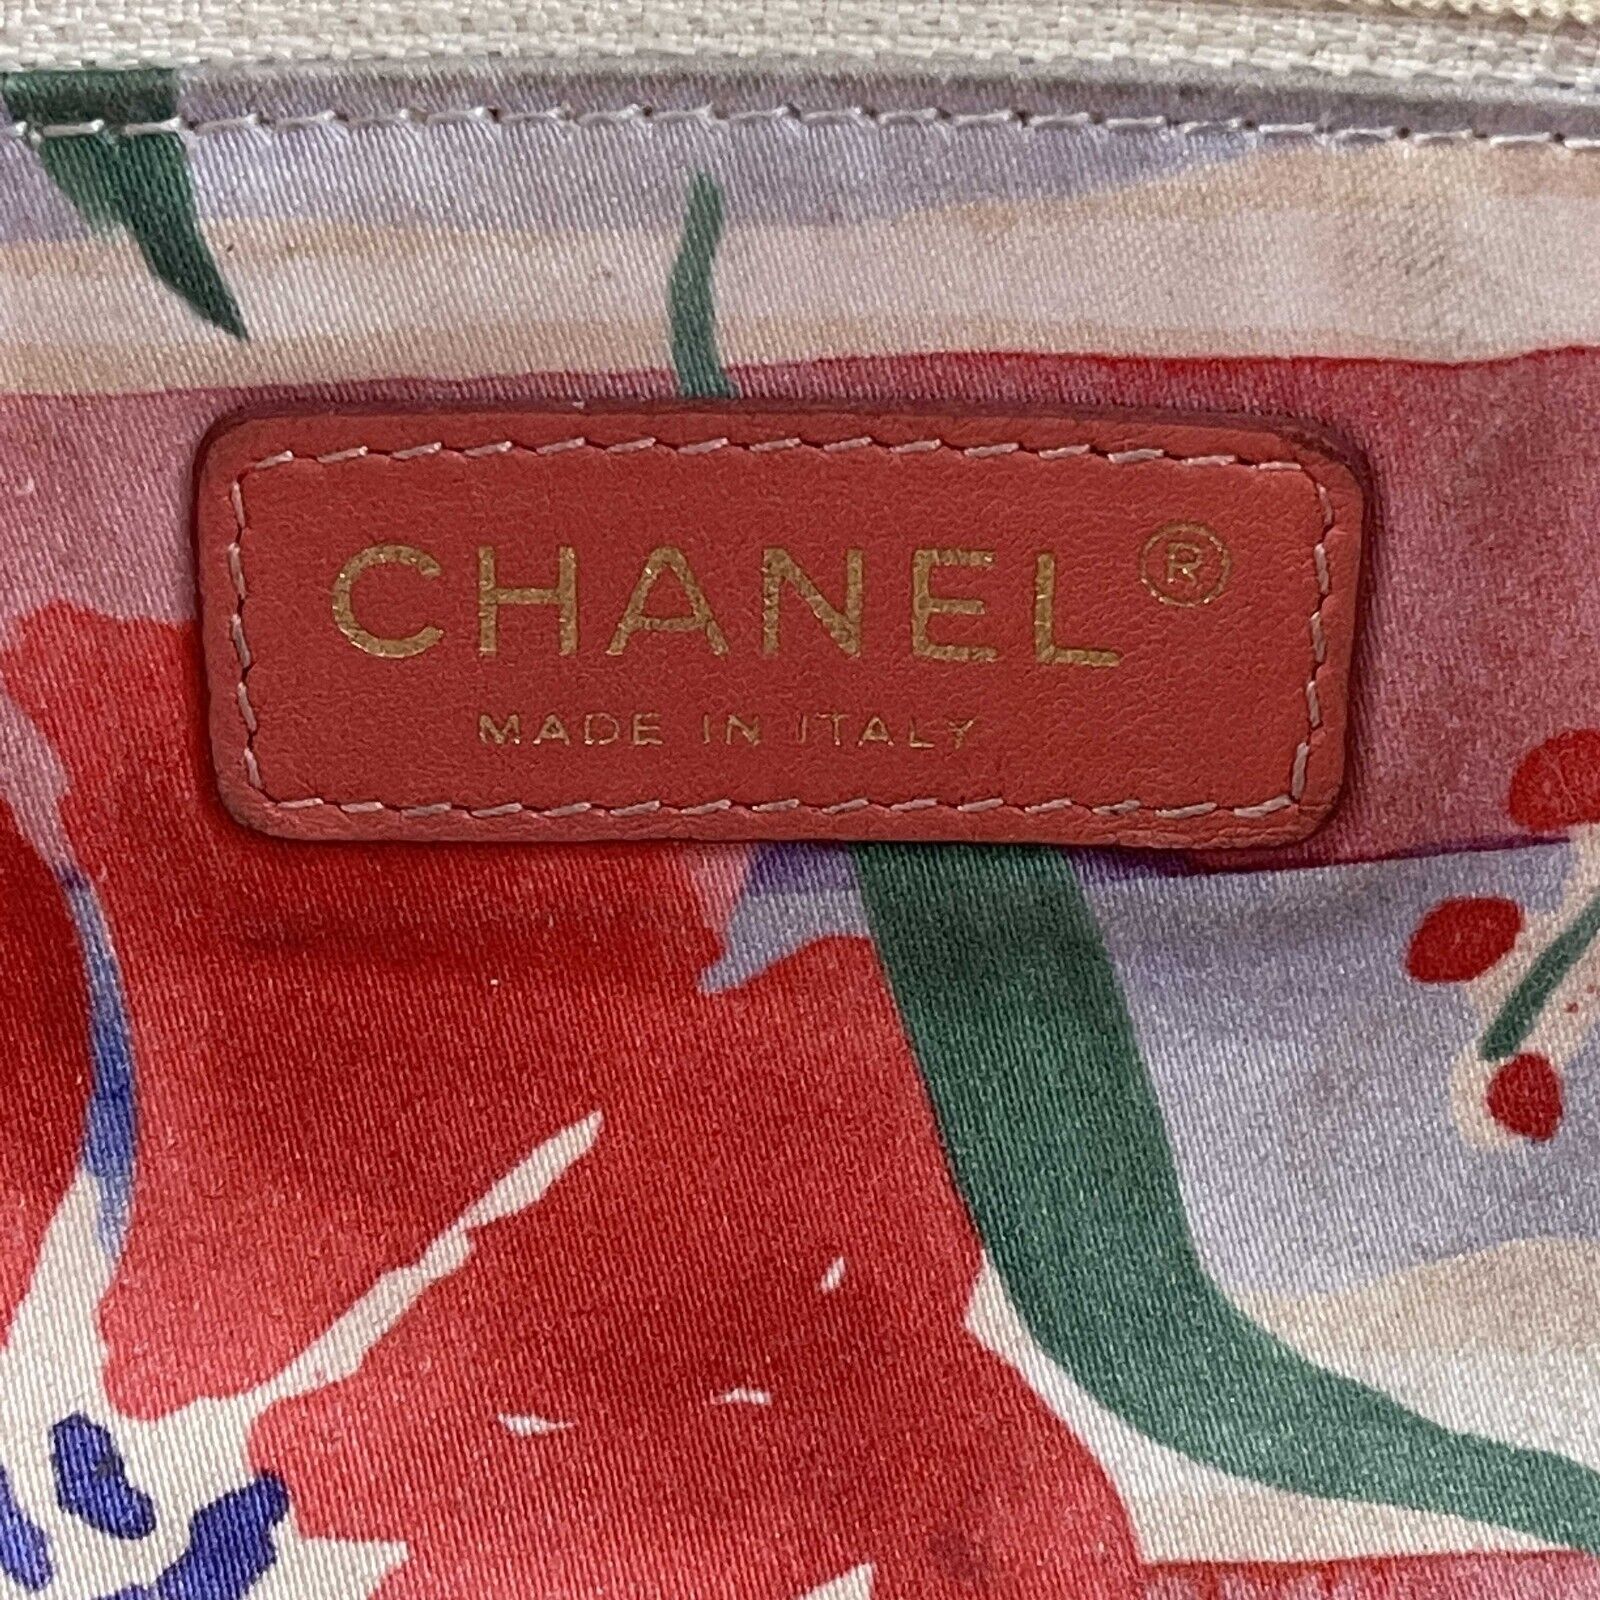 Vintage CHANEL red caviar skin wallet with large CC logo stitch